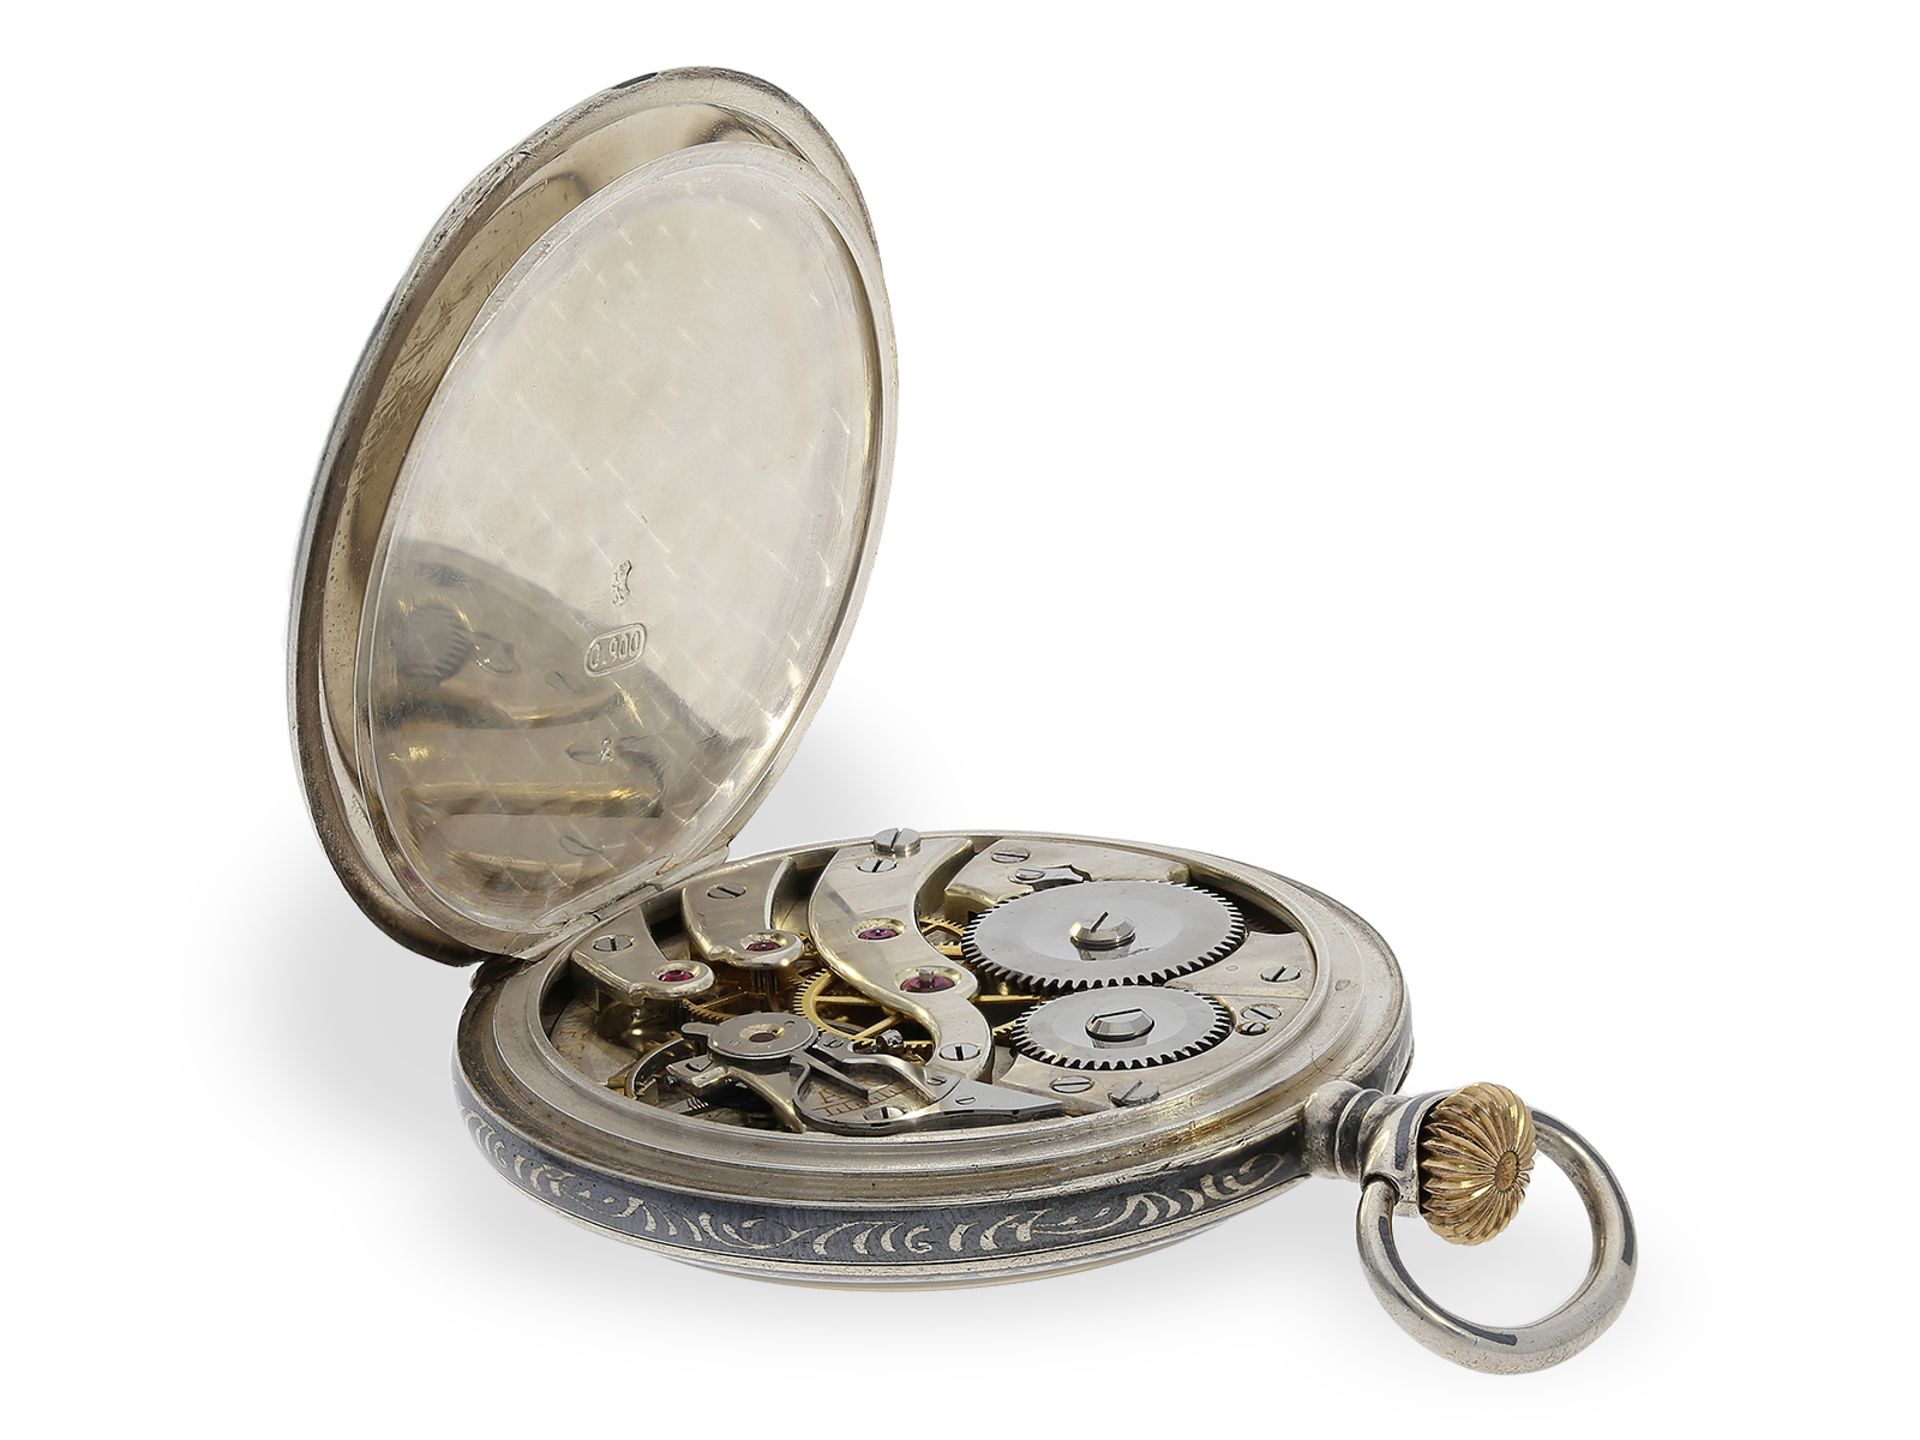 Rare precision pocket watch with niello case, probably apprentice watch, plate engraved F.D. 1927 - Image 4 of 5